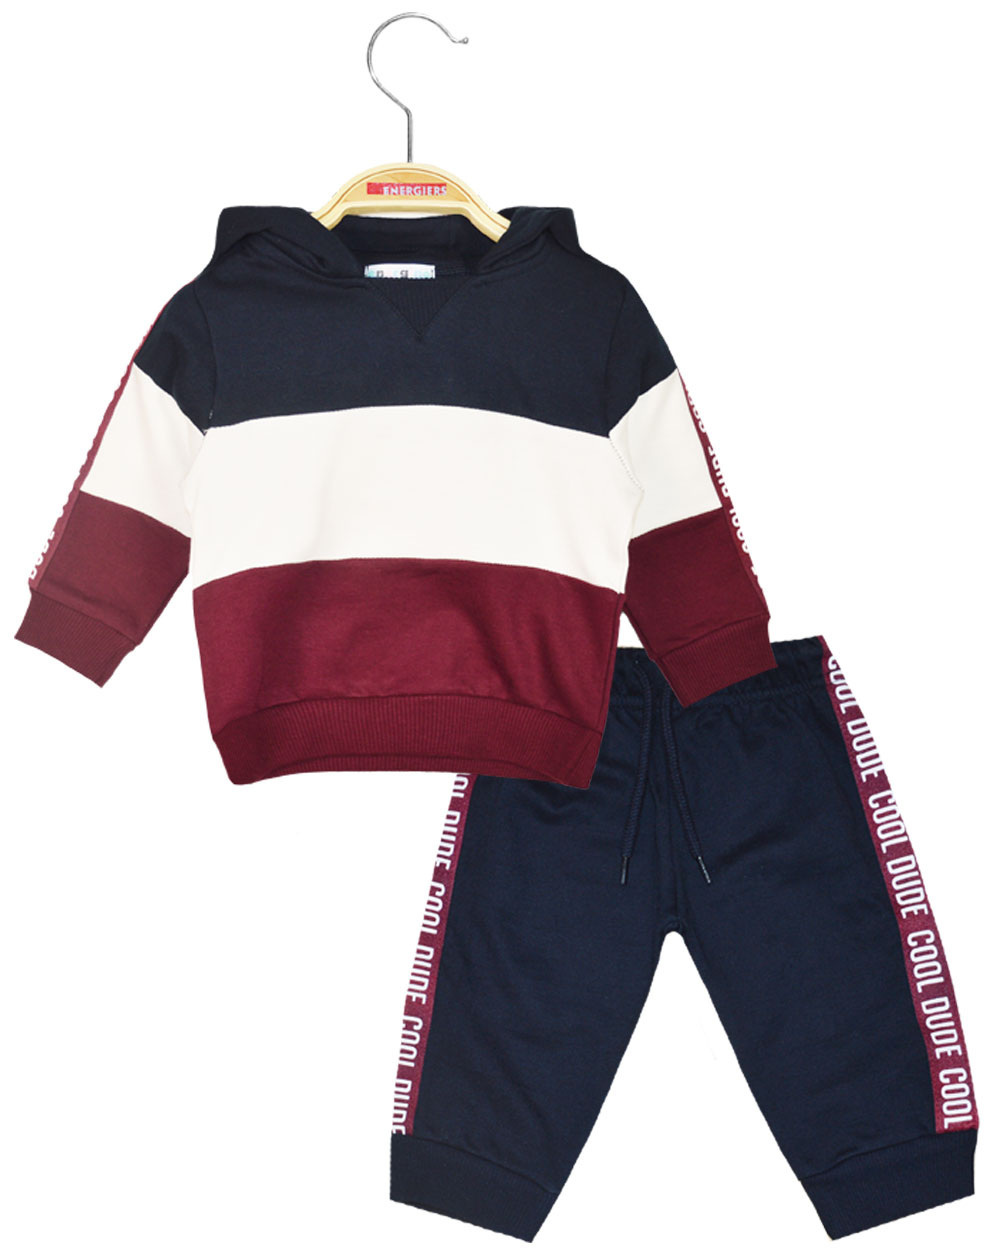 Sweatshirt set with decorative printed tape on the blouse and pants